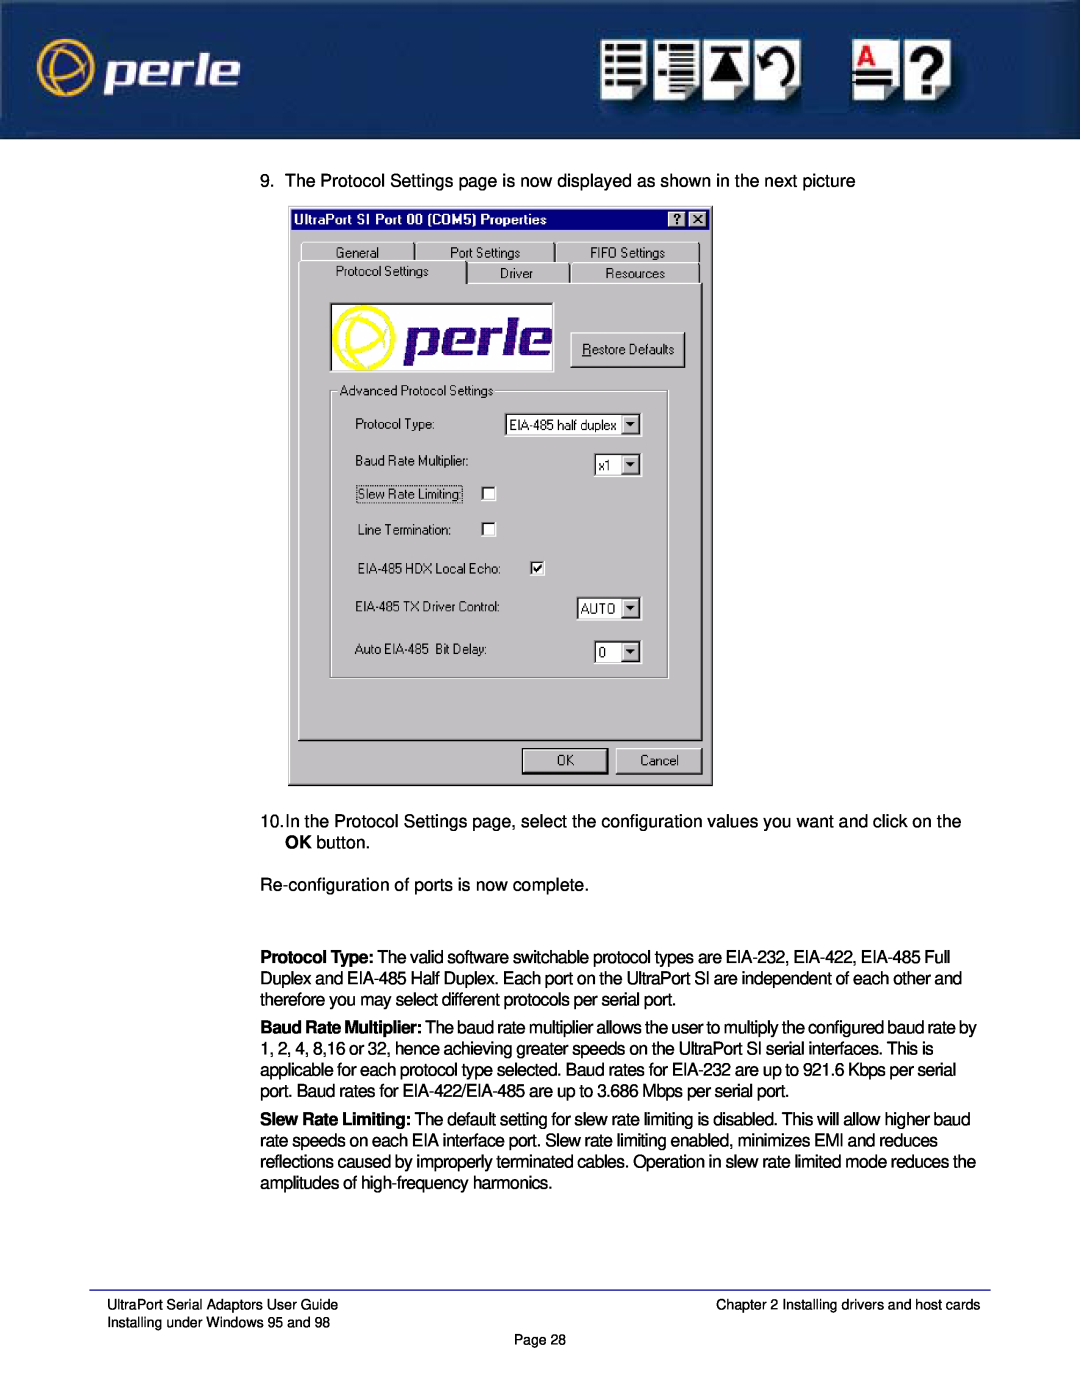 Perle Systems 5500152-23 manual Re-configuration of ports is now complete 